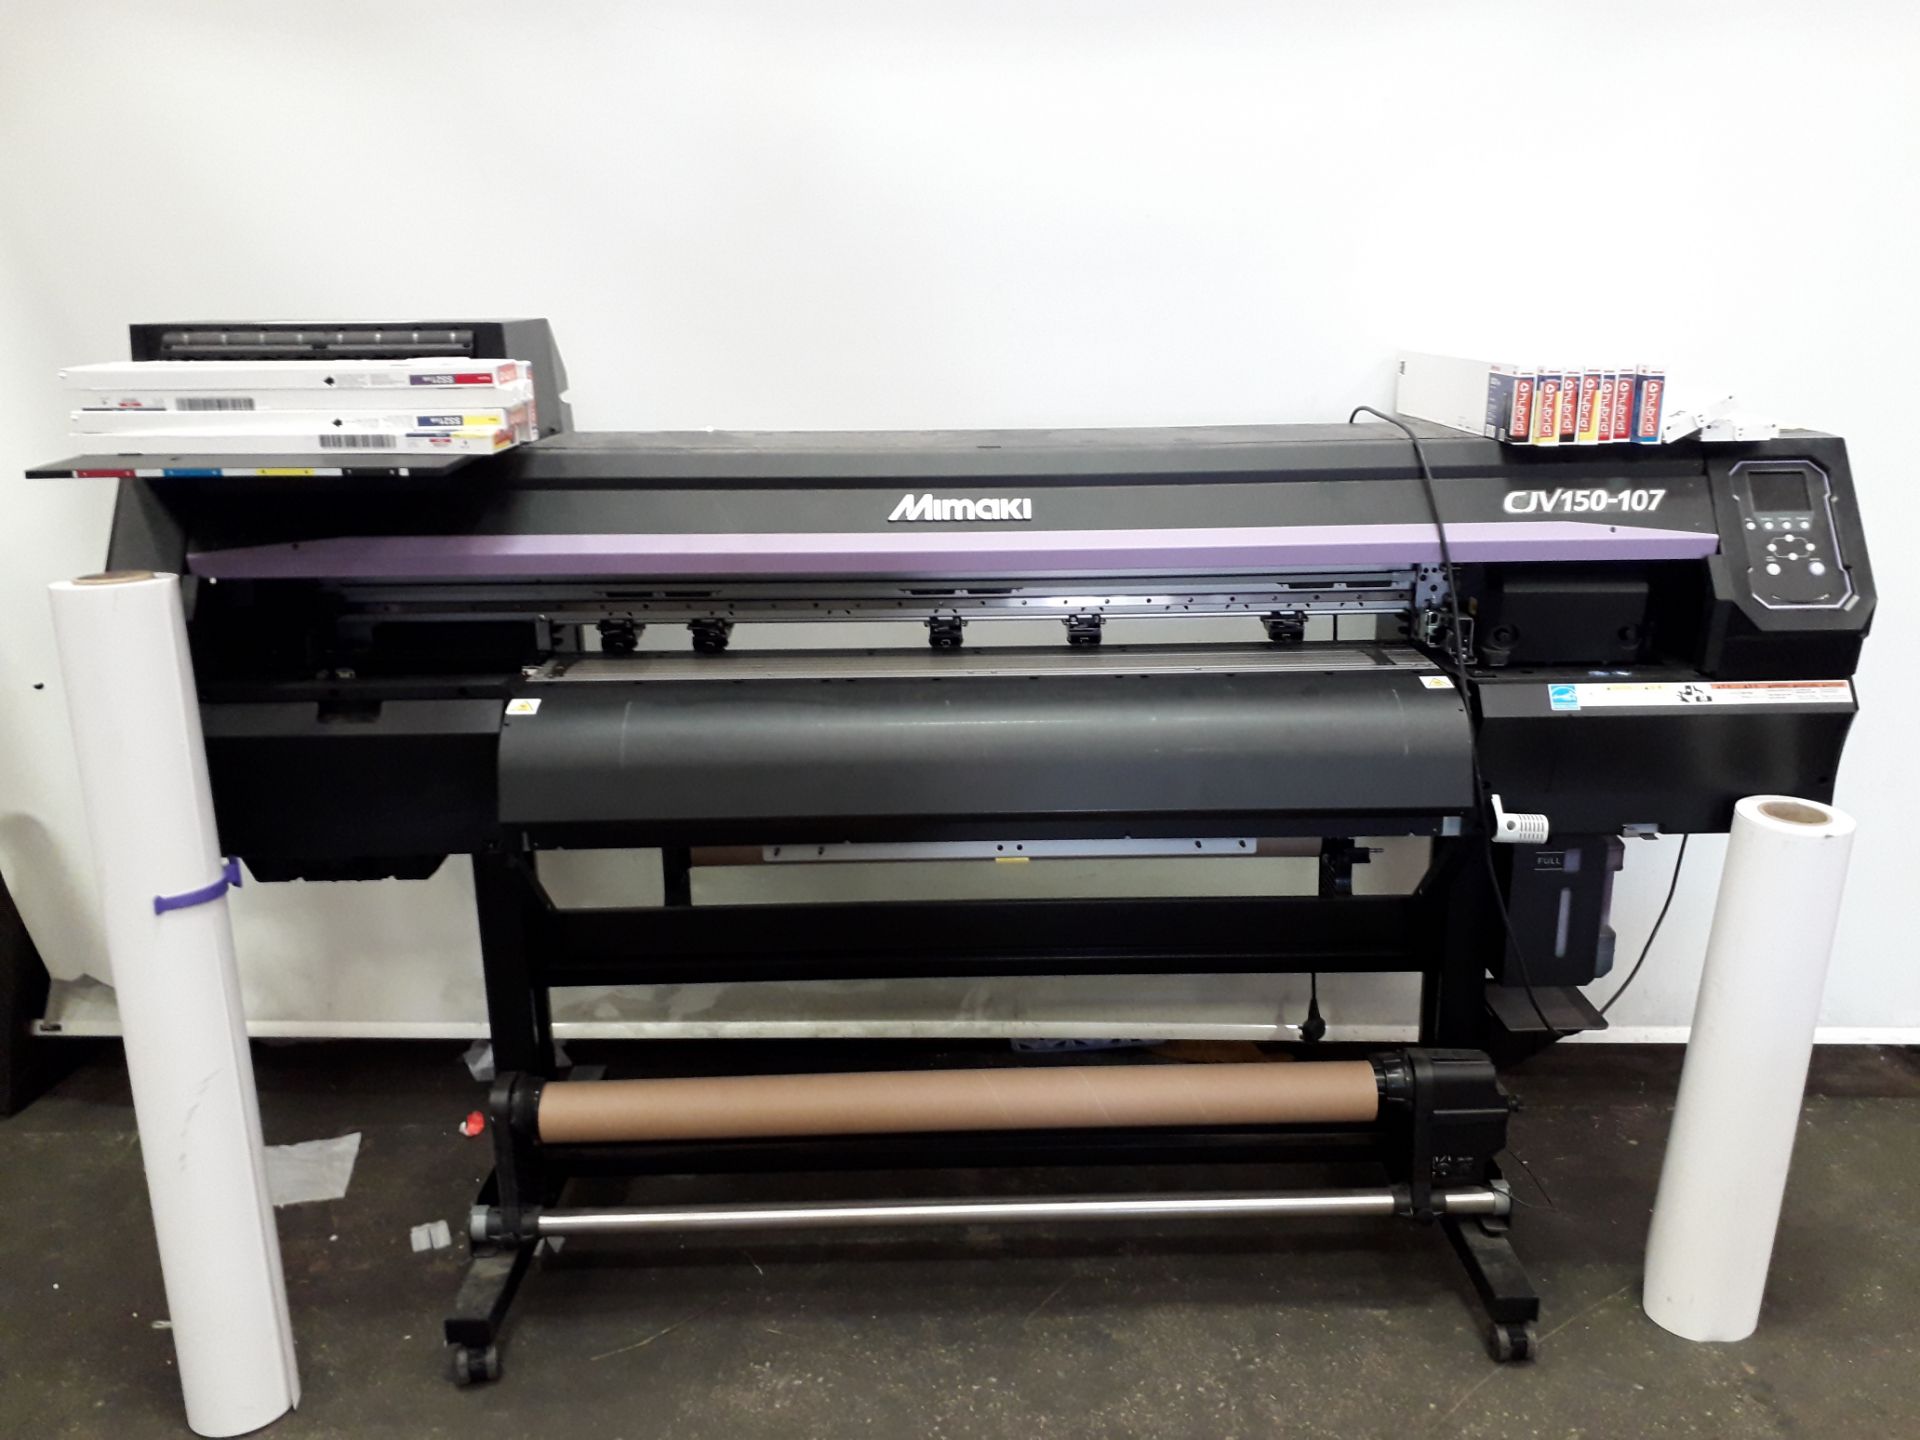 1 X MIMAKI CJV 150- 107 ECO SOLVENT PRINTER SIGN MAKING PRINTS AND CUTS AND VARIOUS INKS AND 2 X